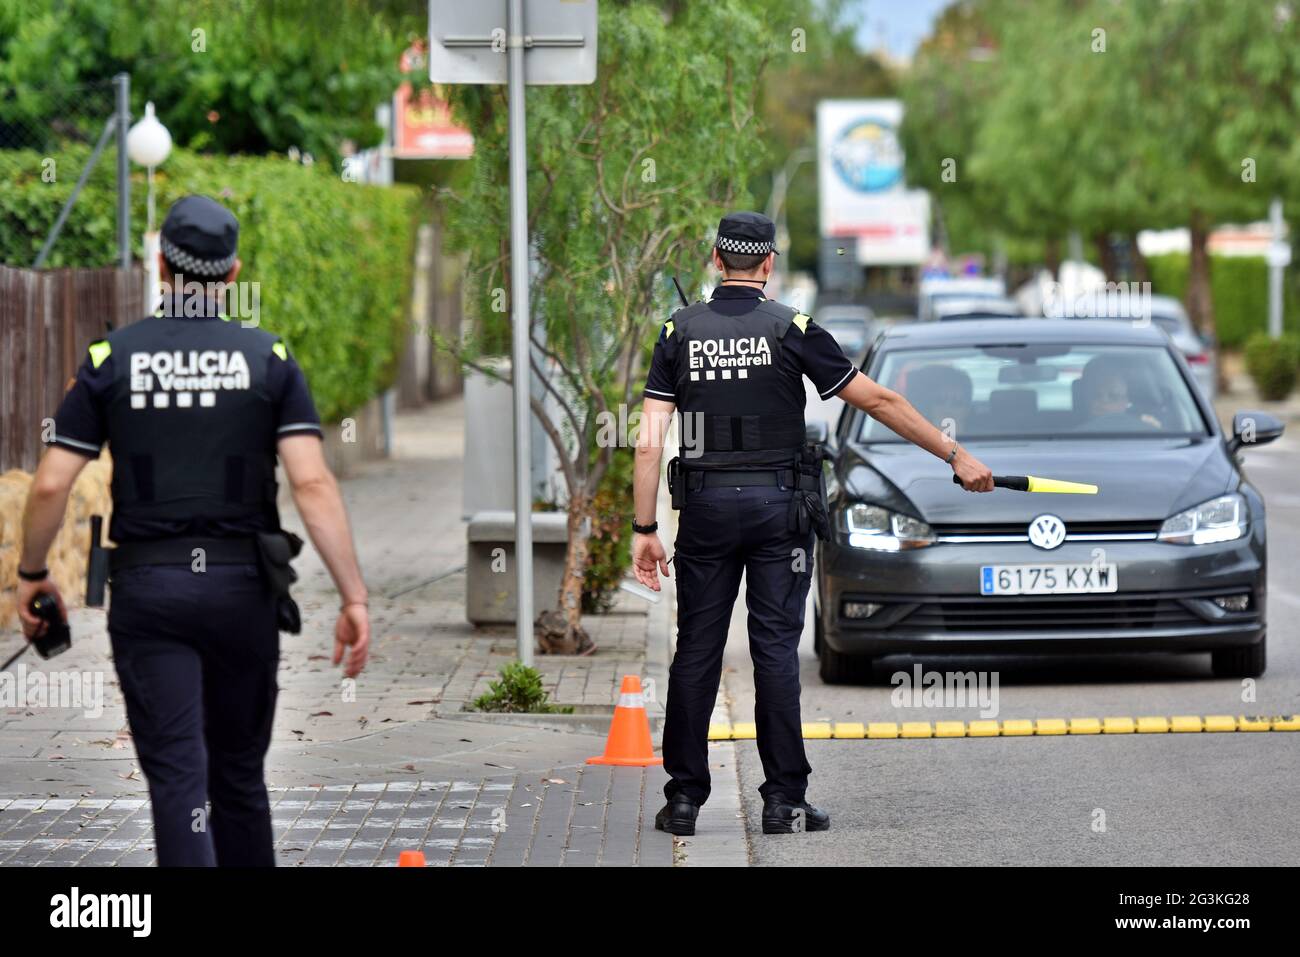 Vendrell, Spain. 16th June, 2021. A local police officer pulls-over a  vehicle during a police control at a checkpoint.The Local Police of  Vendrell Spain, carries out random traffic police controls to ensure